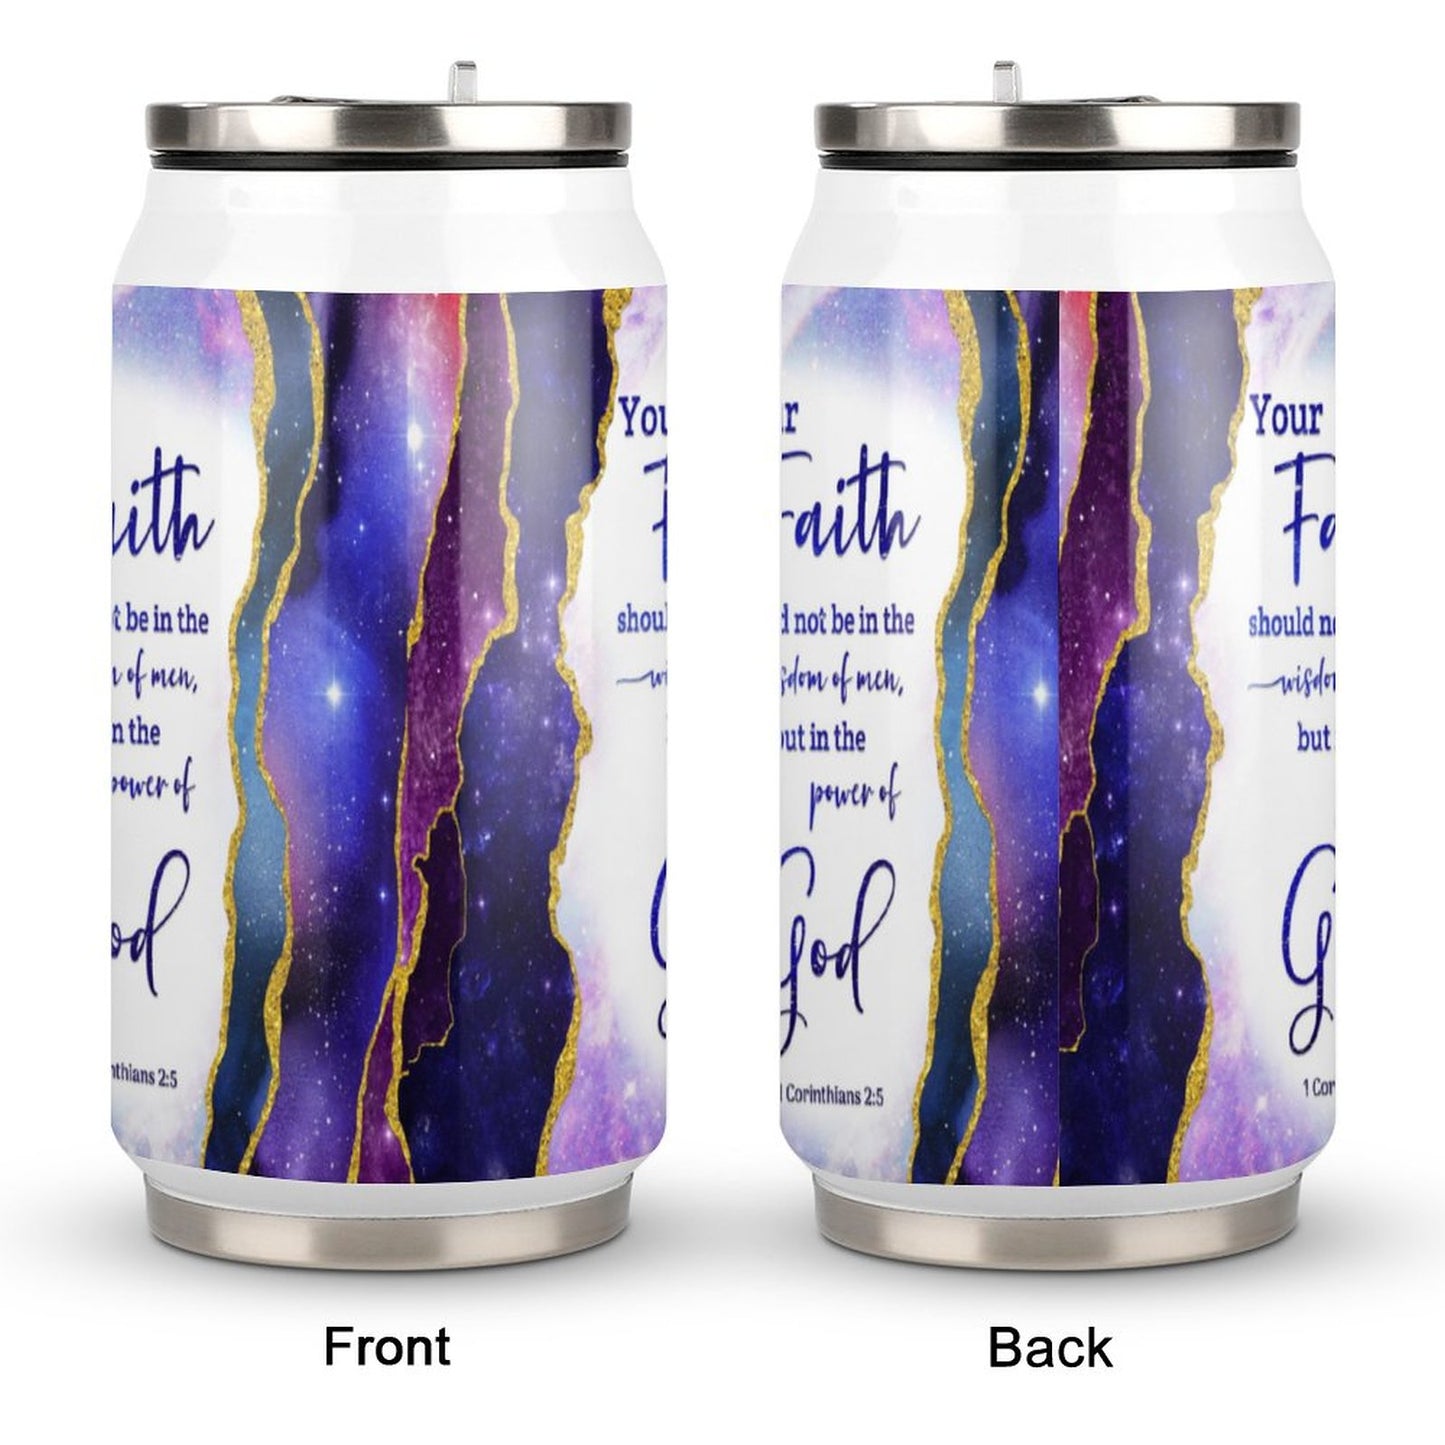 Your Faith Should Be In The Power of God Christian Stainless Steel Tumbler with Straw SALE-Personal Design